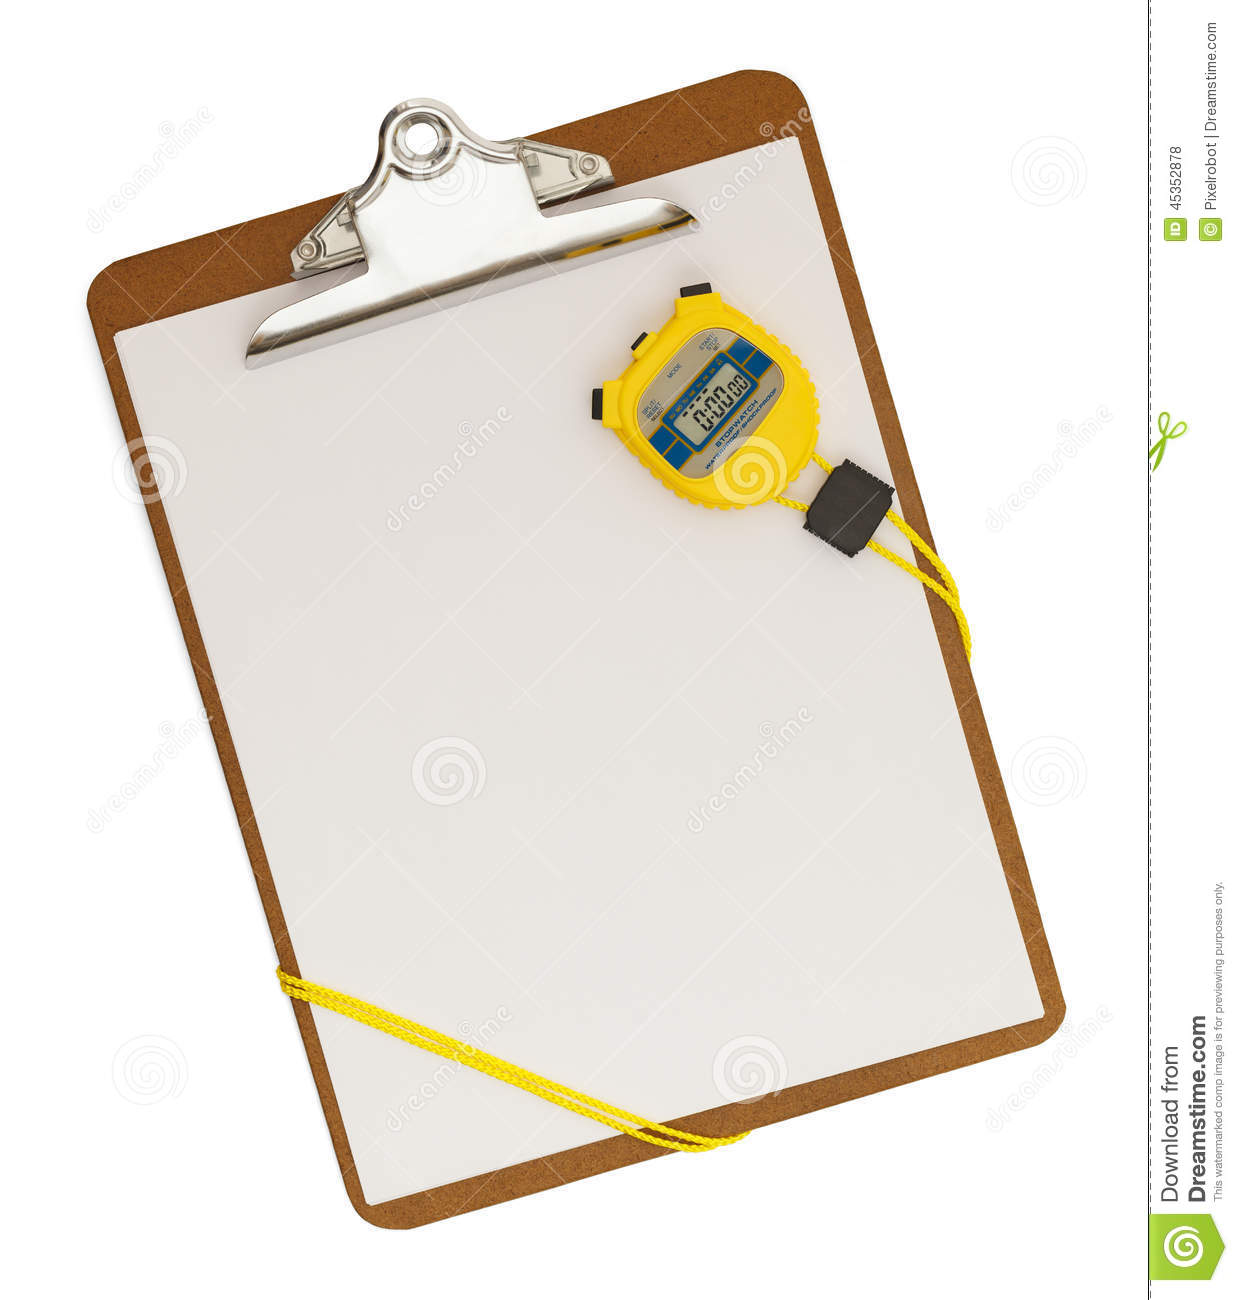 Blank Clipboard With Stop Watch On Isolated White Background 